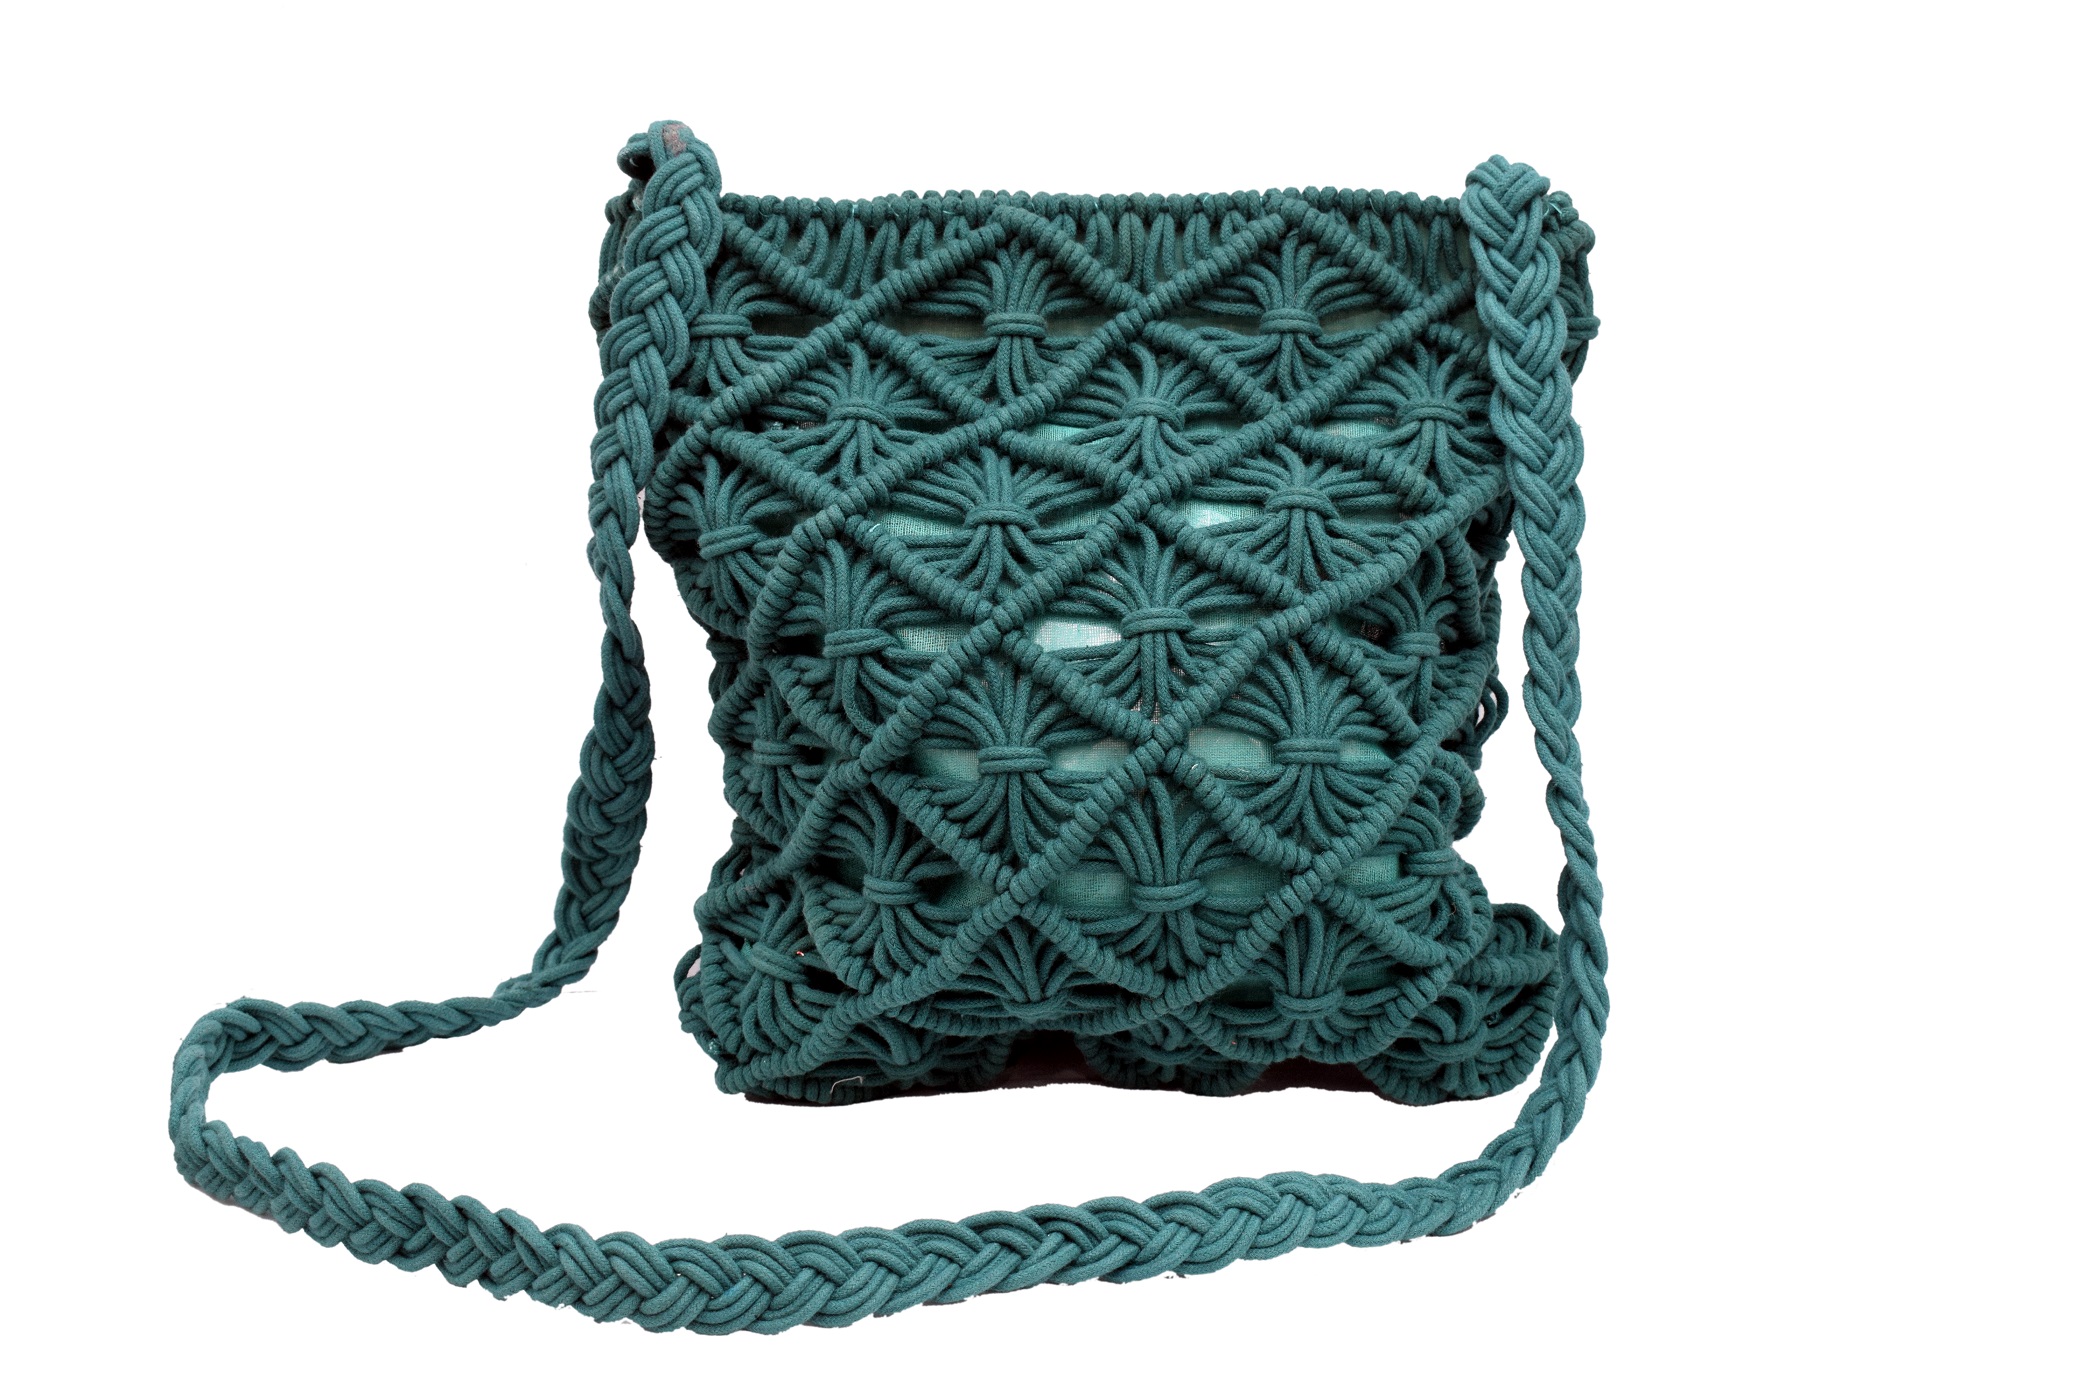 Nisa Handmade Straw Bag Travel Beach Fishing Net Handbag Shopping Woven Shoulder Bag for Women with Stitched Lining Bottle Green by BTI Engineers